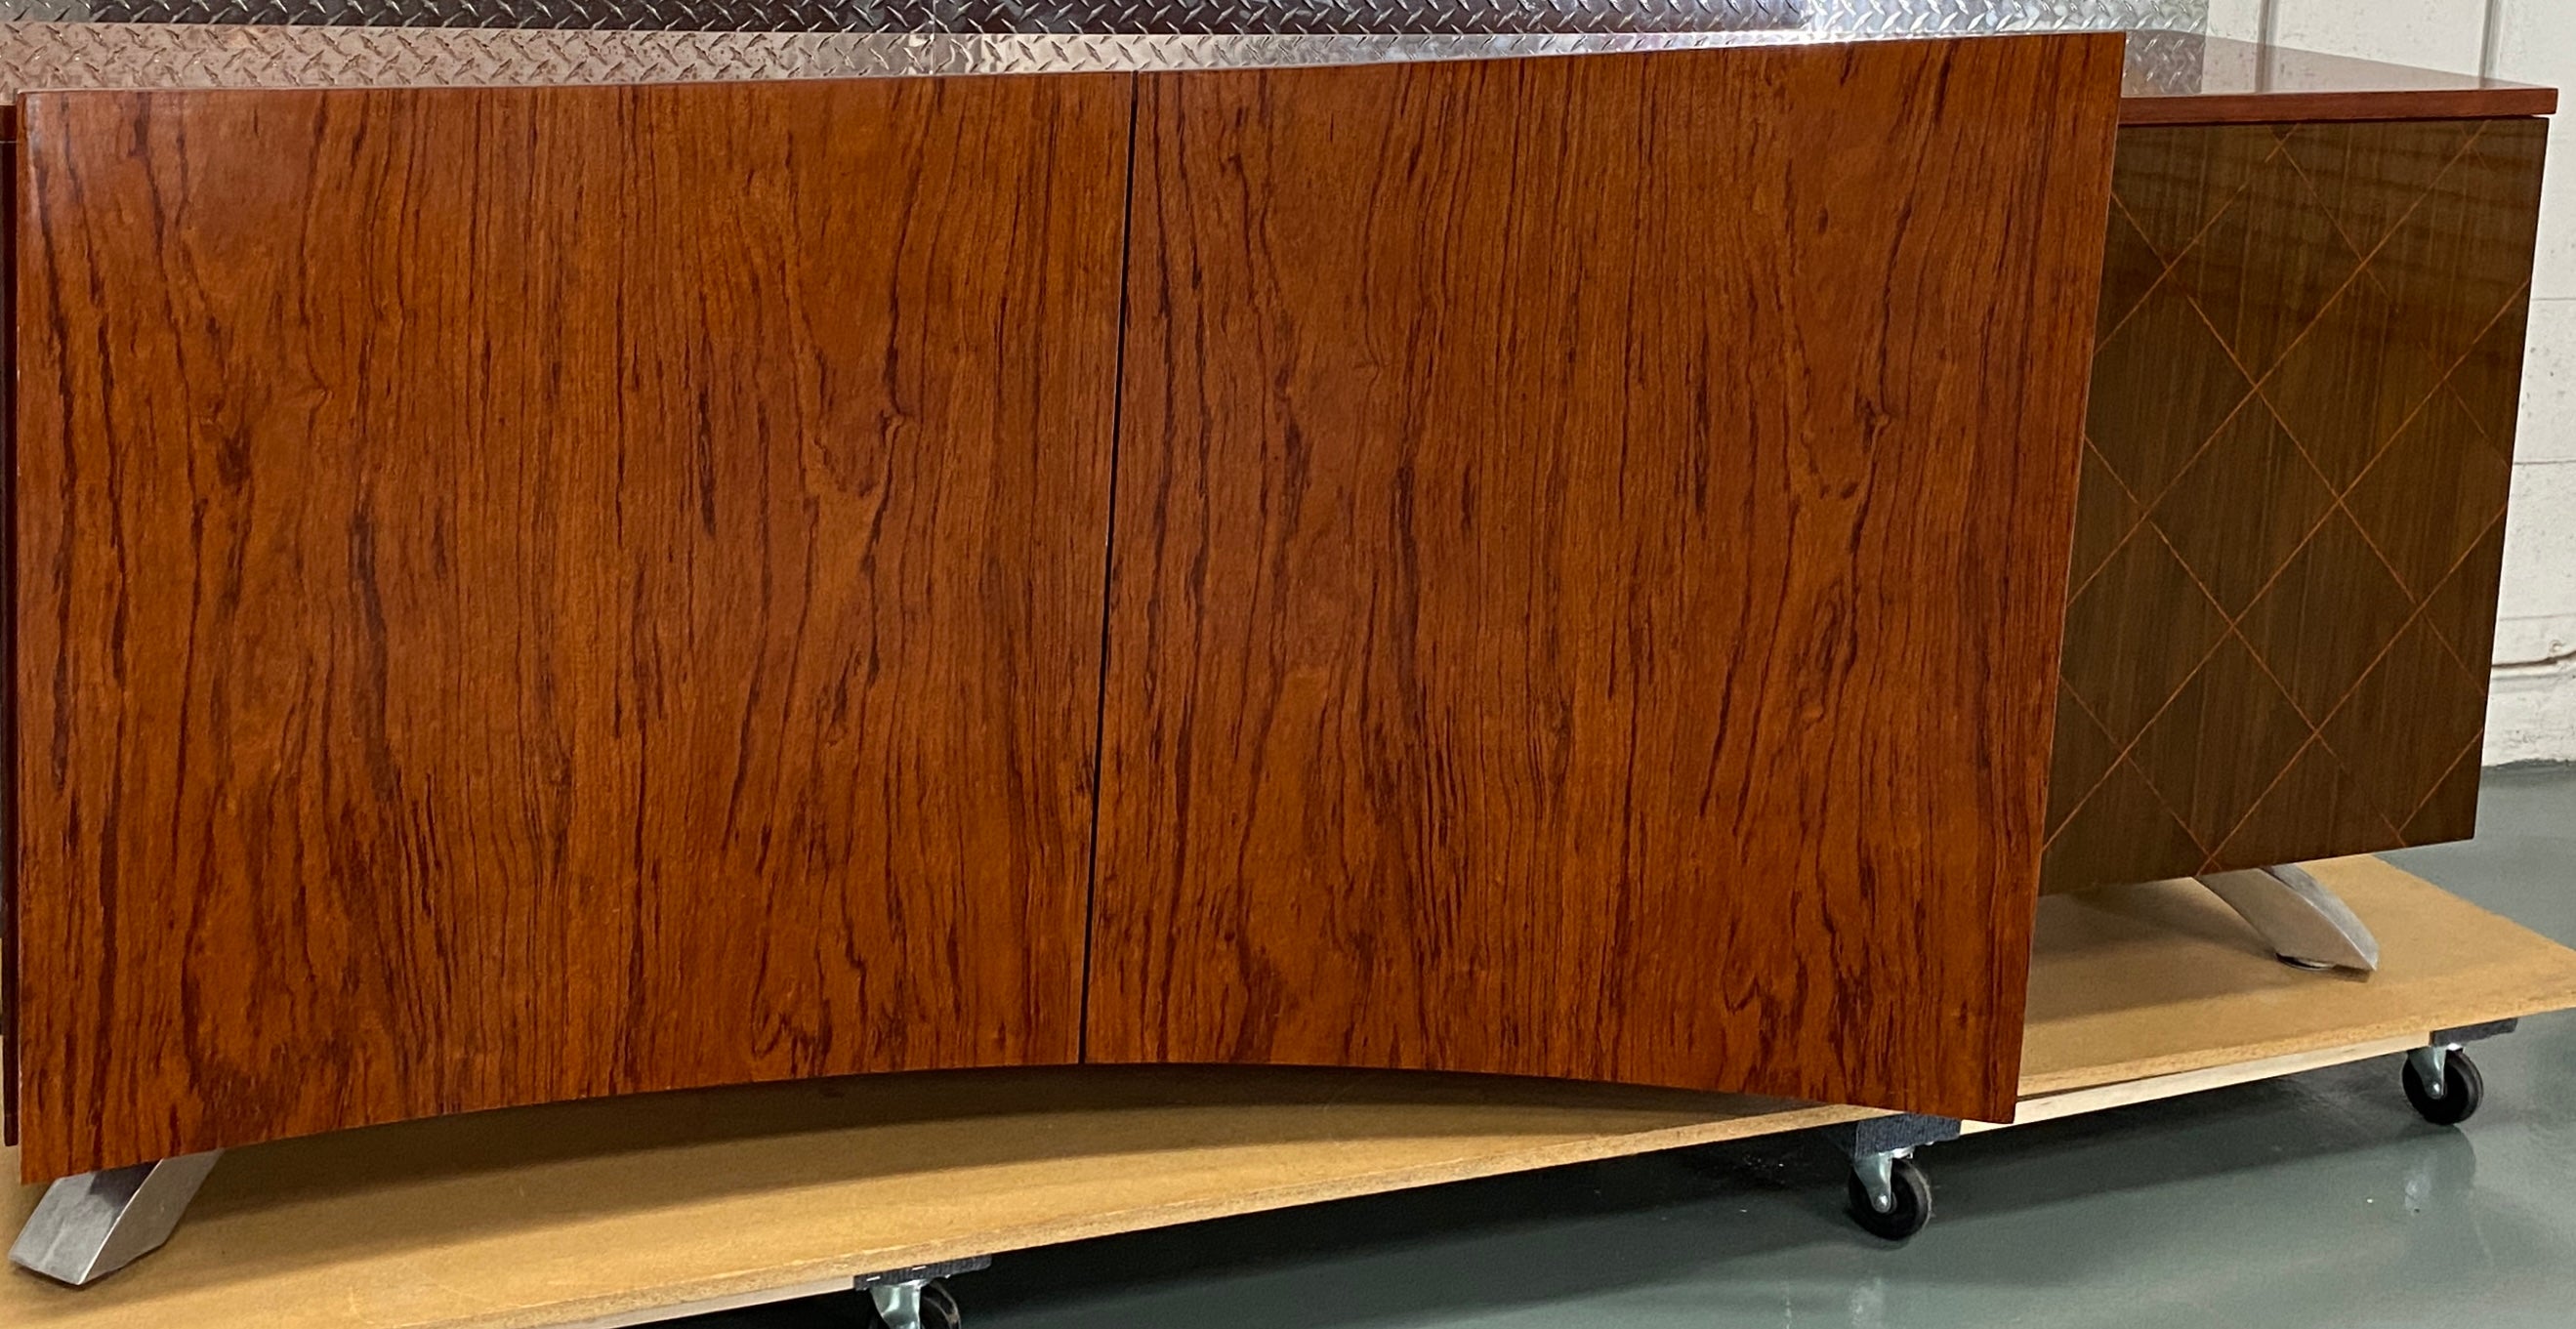 This stunning Dakota Jackson credenza or mid-century modern buffet made of rosewood exemplifies the best of American  modern design with hints of Danish style. Crafted in Italy by skilled artisans, it boasts a generous amount of storage with three